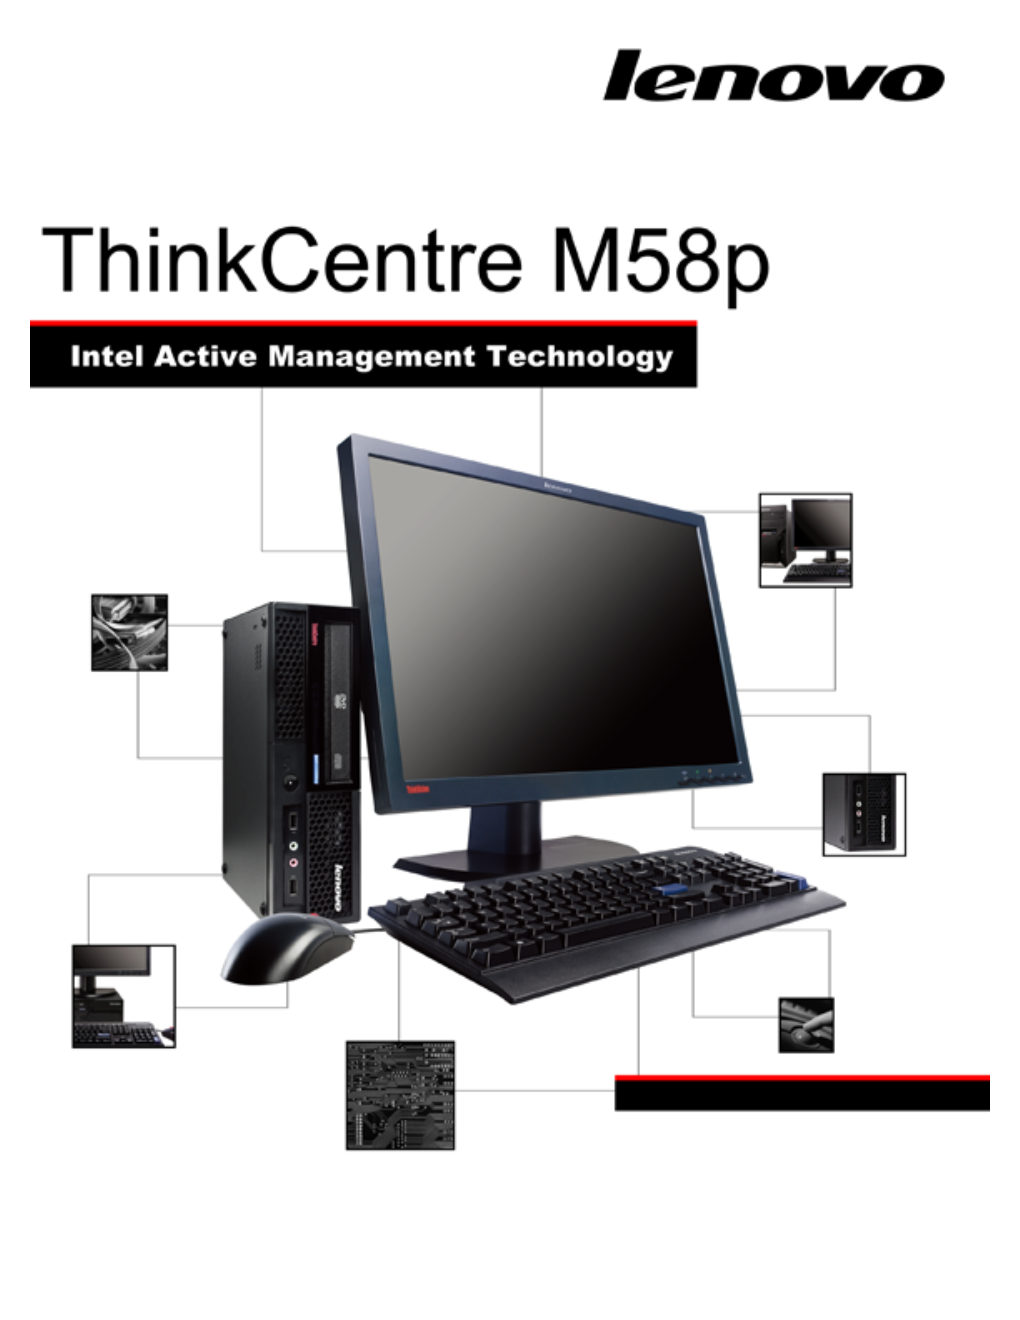 Thinkcentre M58p with Intel AMT White Paper